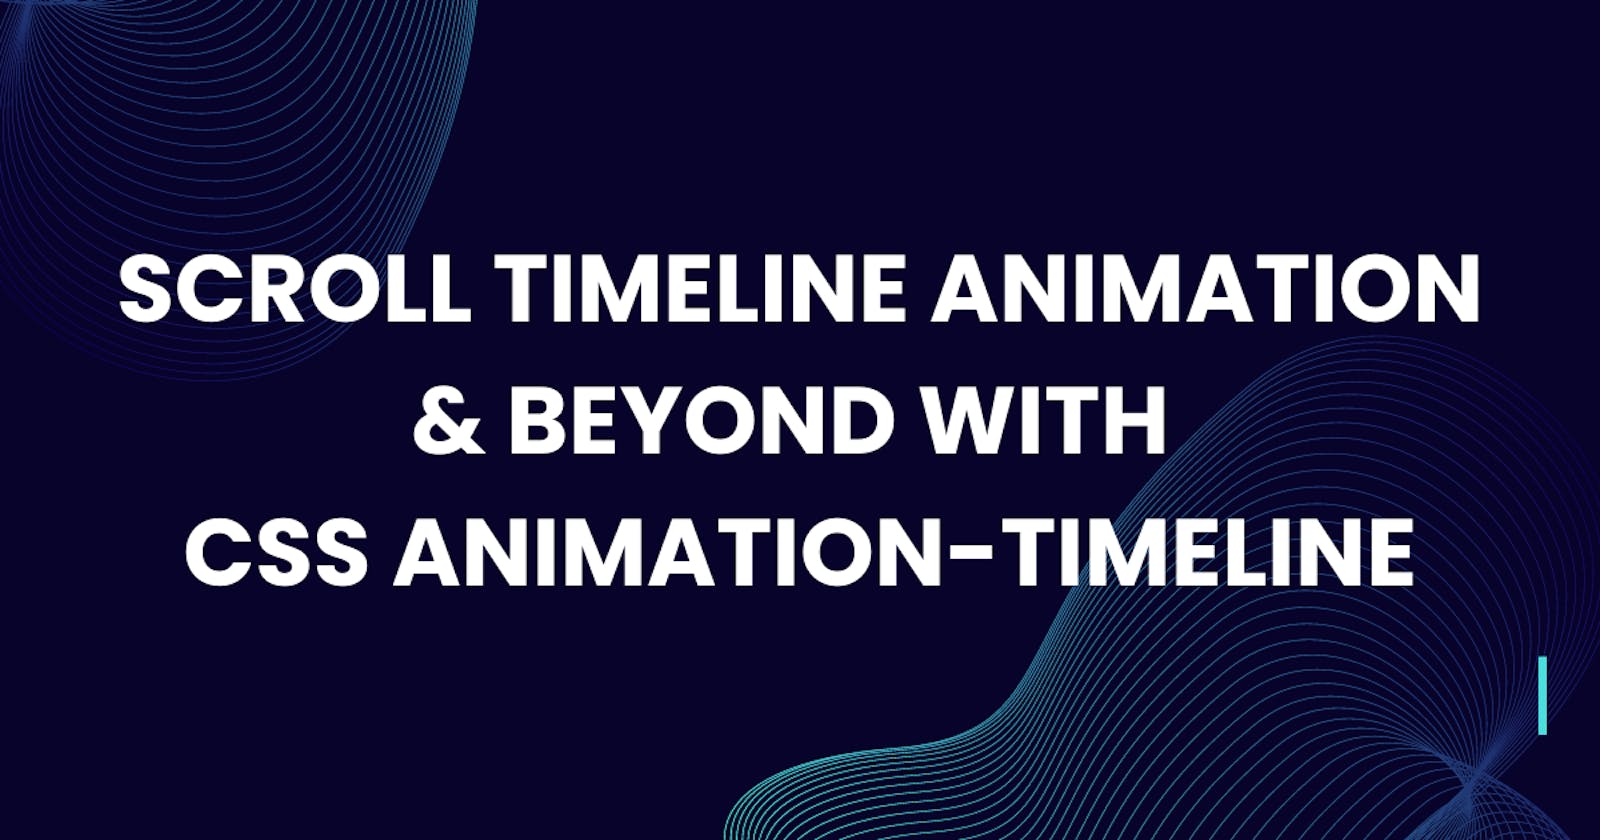 Scroll Timeline Animation & Beyond with CSS animation-timeline